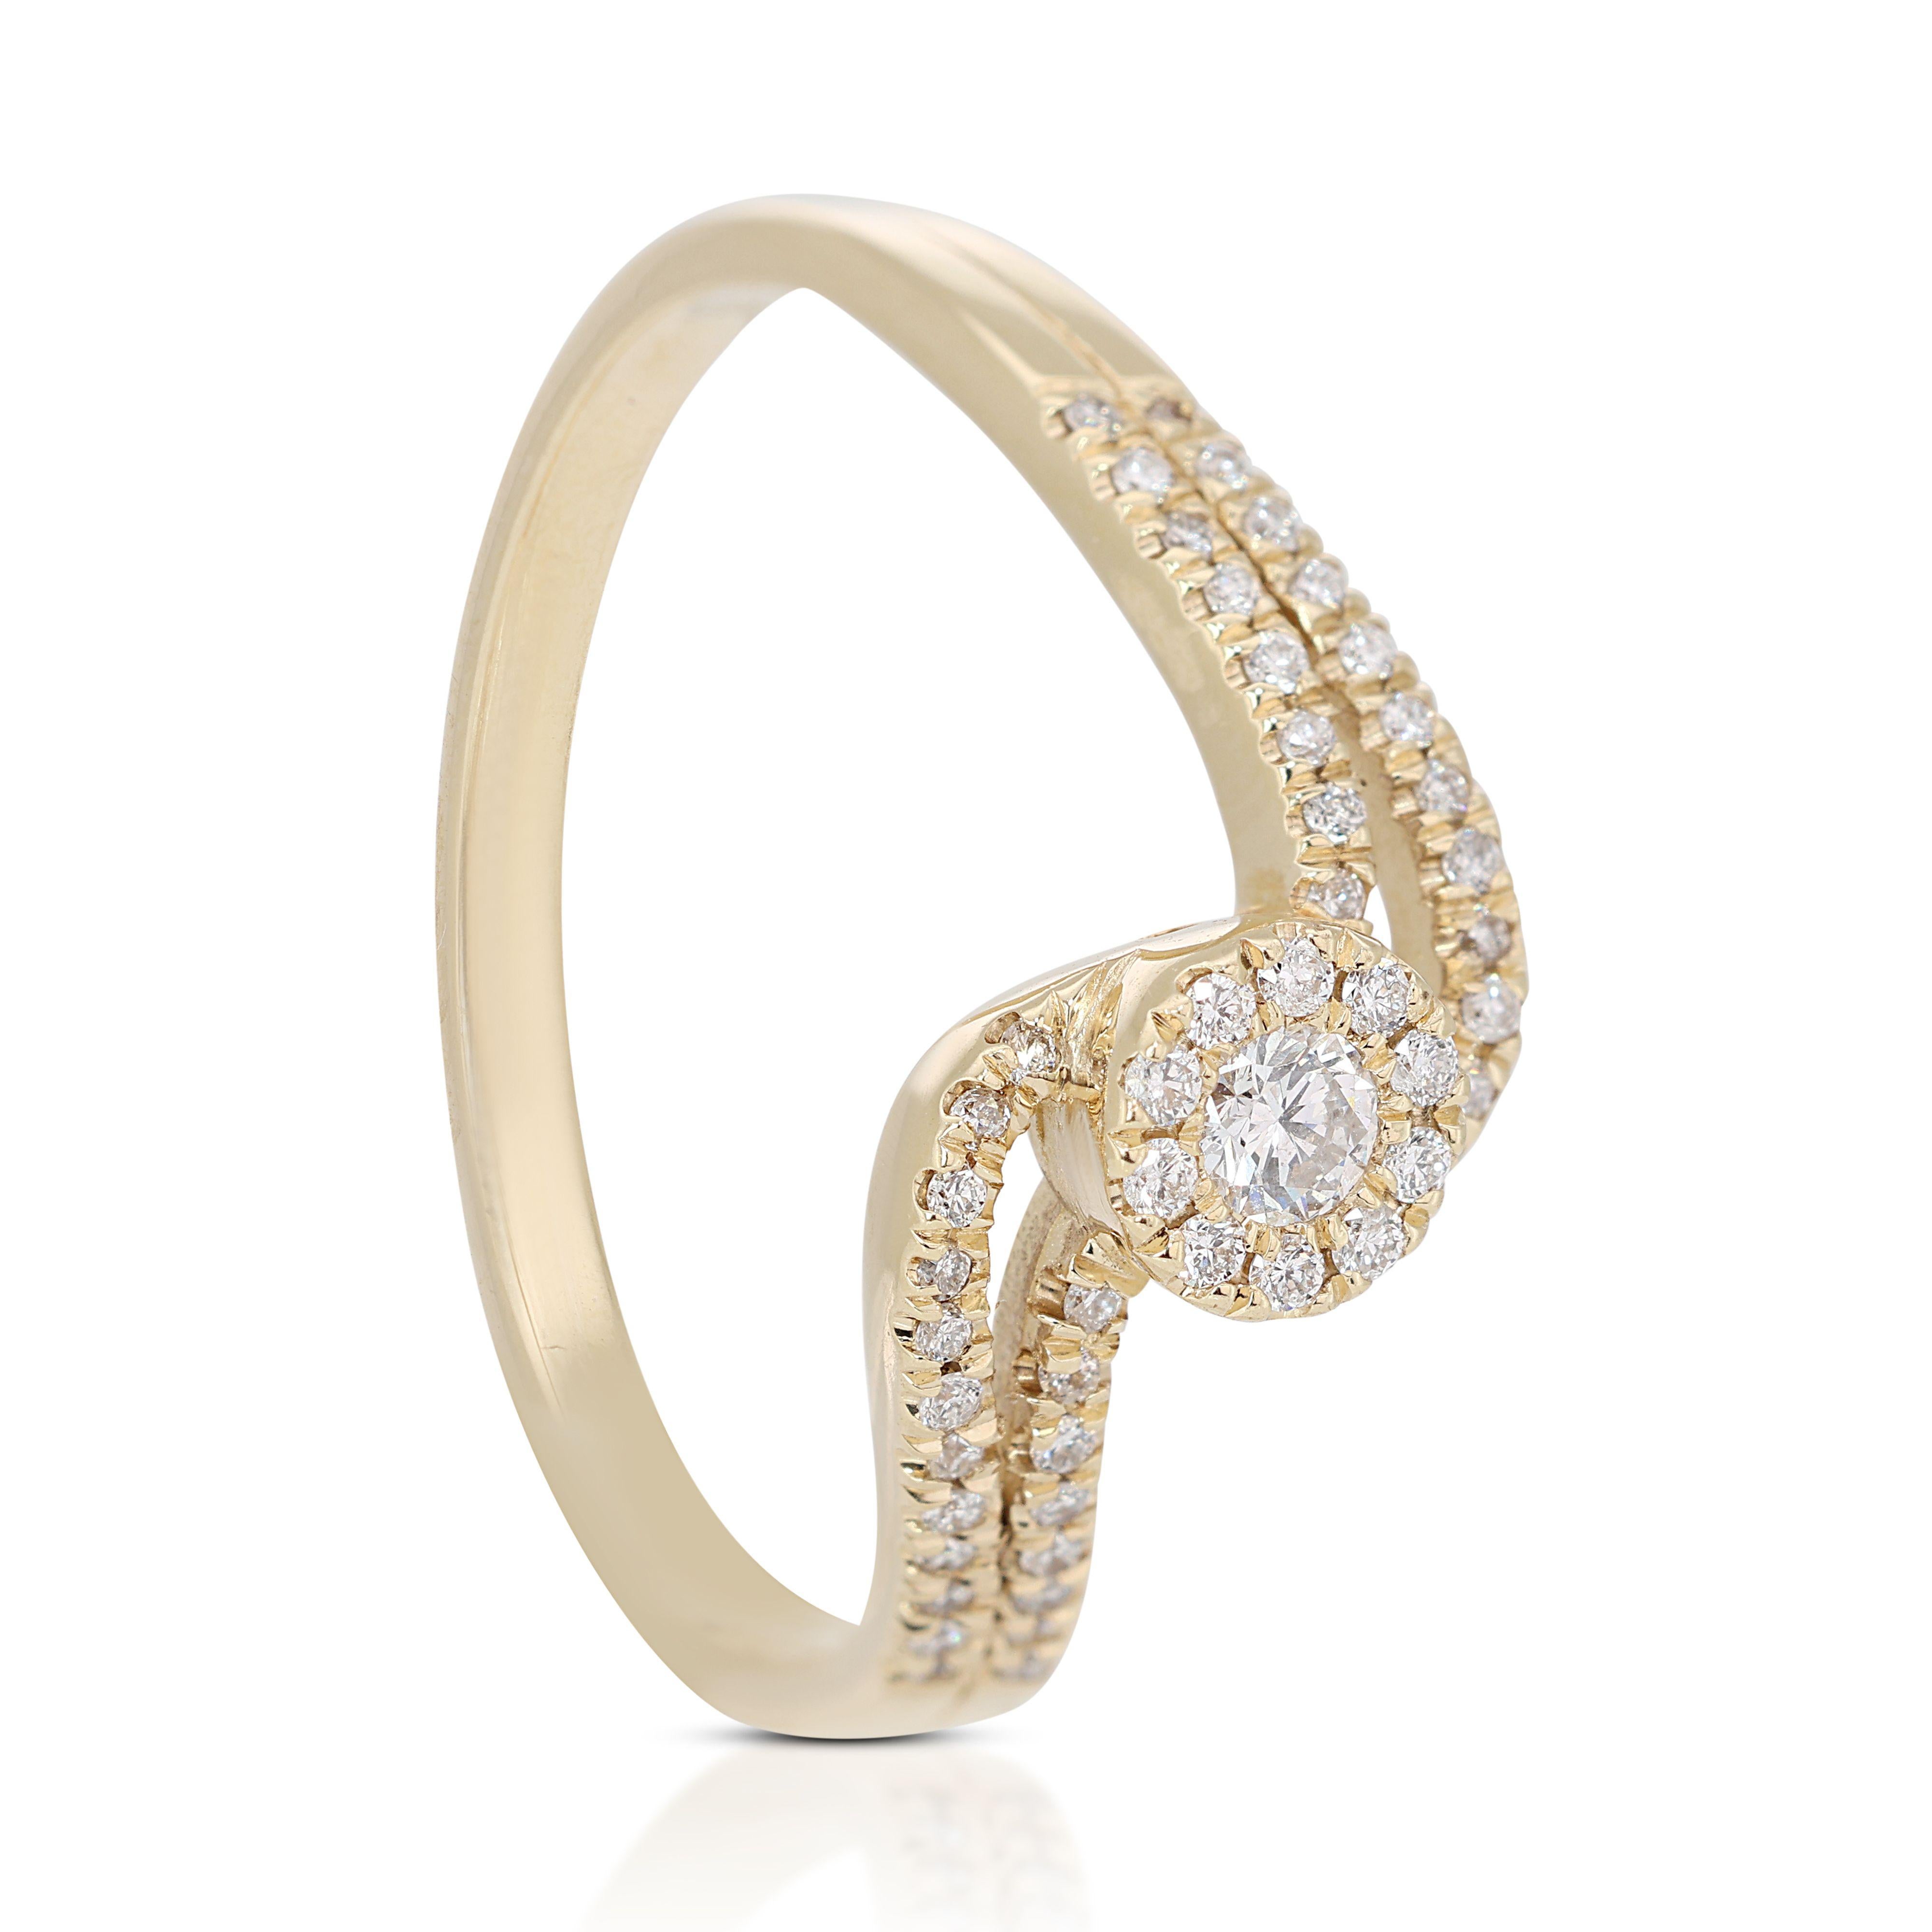 Sparkling Curve Design 14k Yellow Gold Halo Ring with 0.07 Natural Diamonds For Sale 2